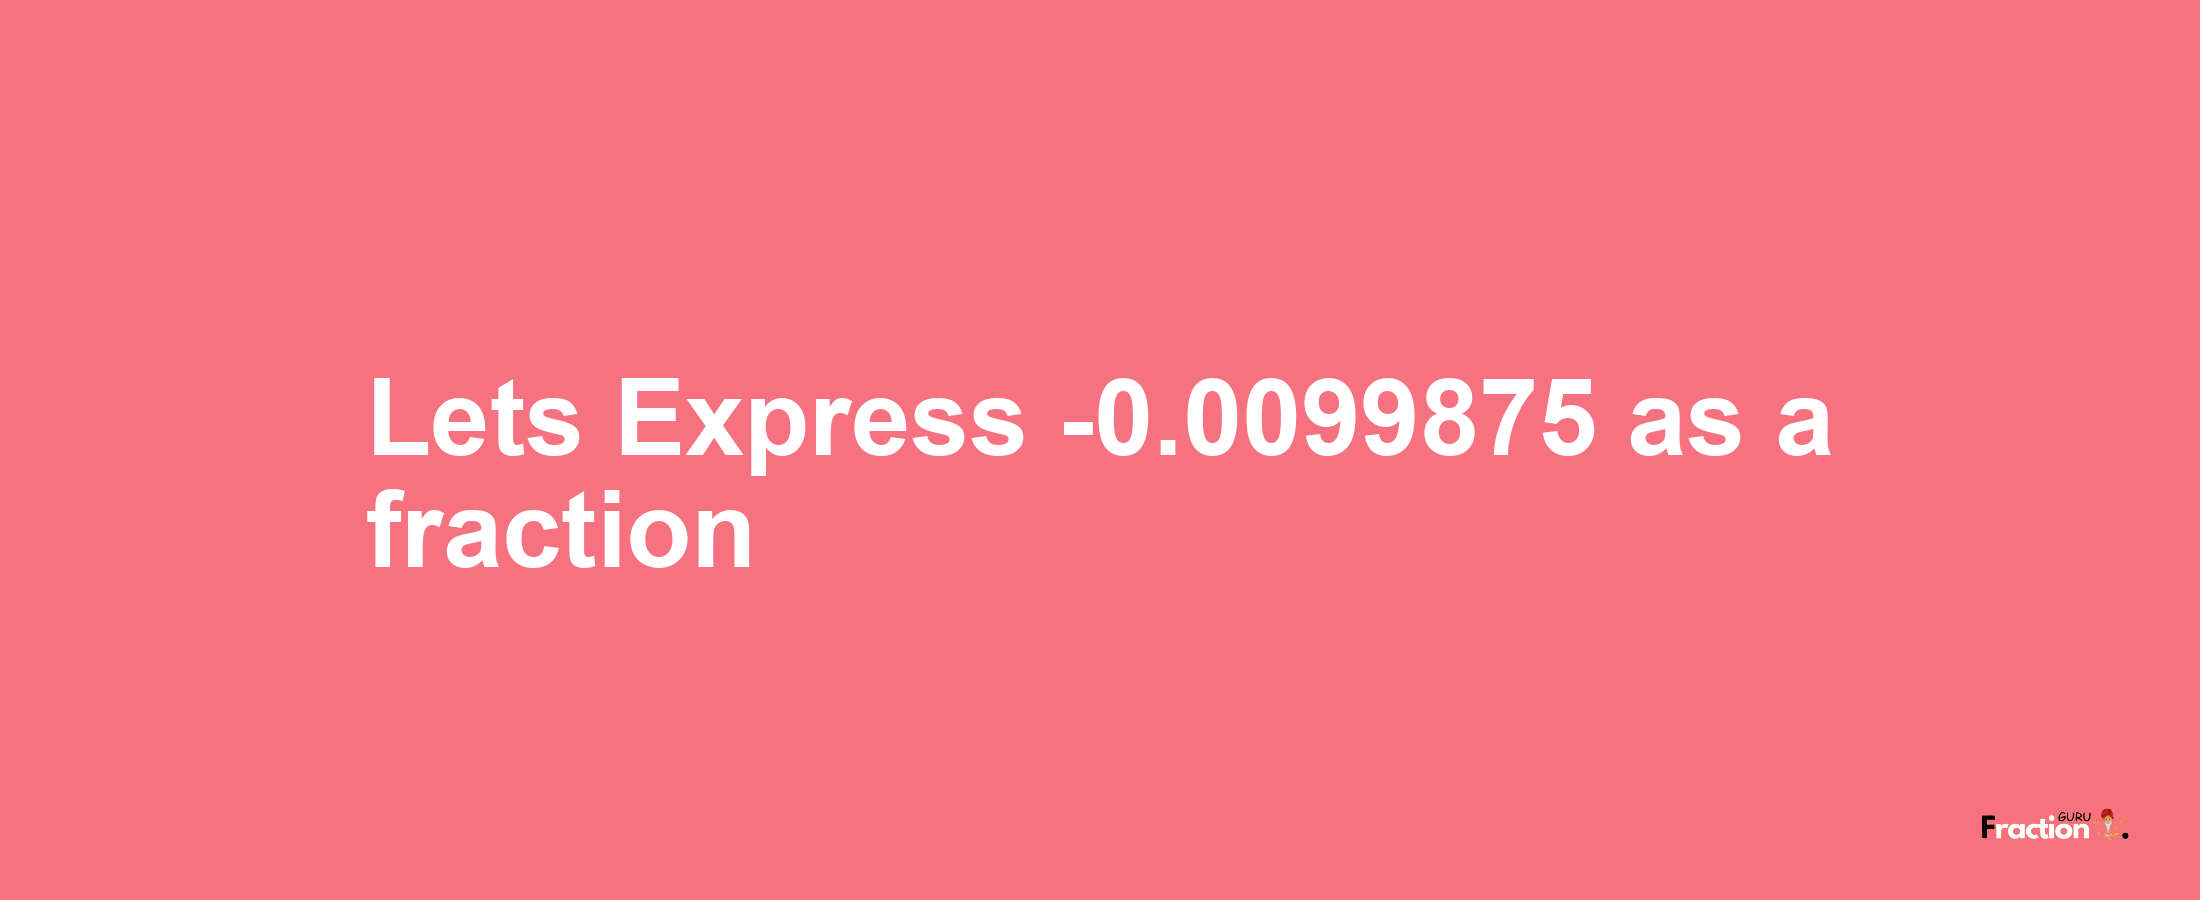 Lets Express -0.0099875 as afraction